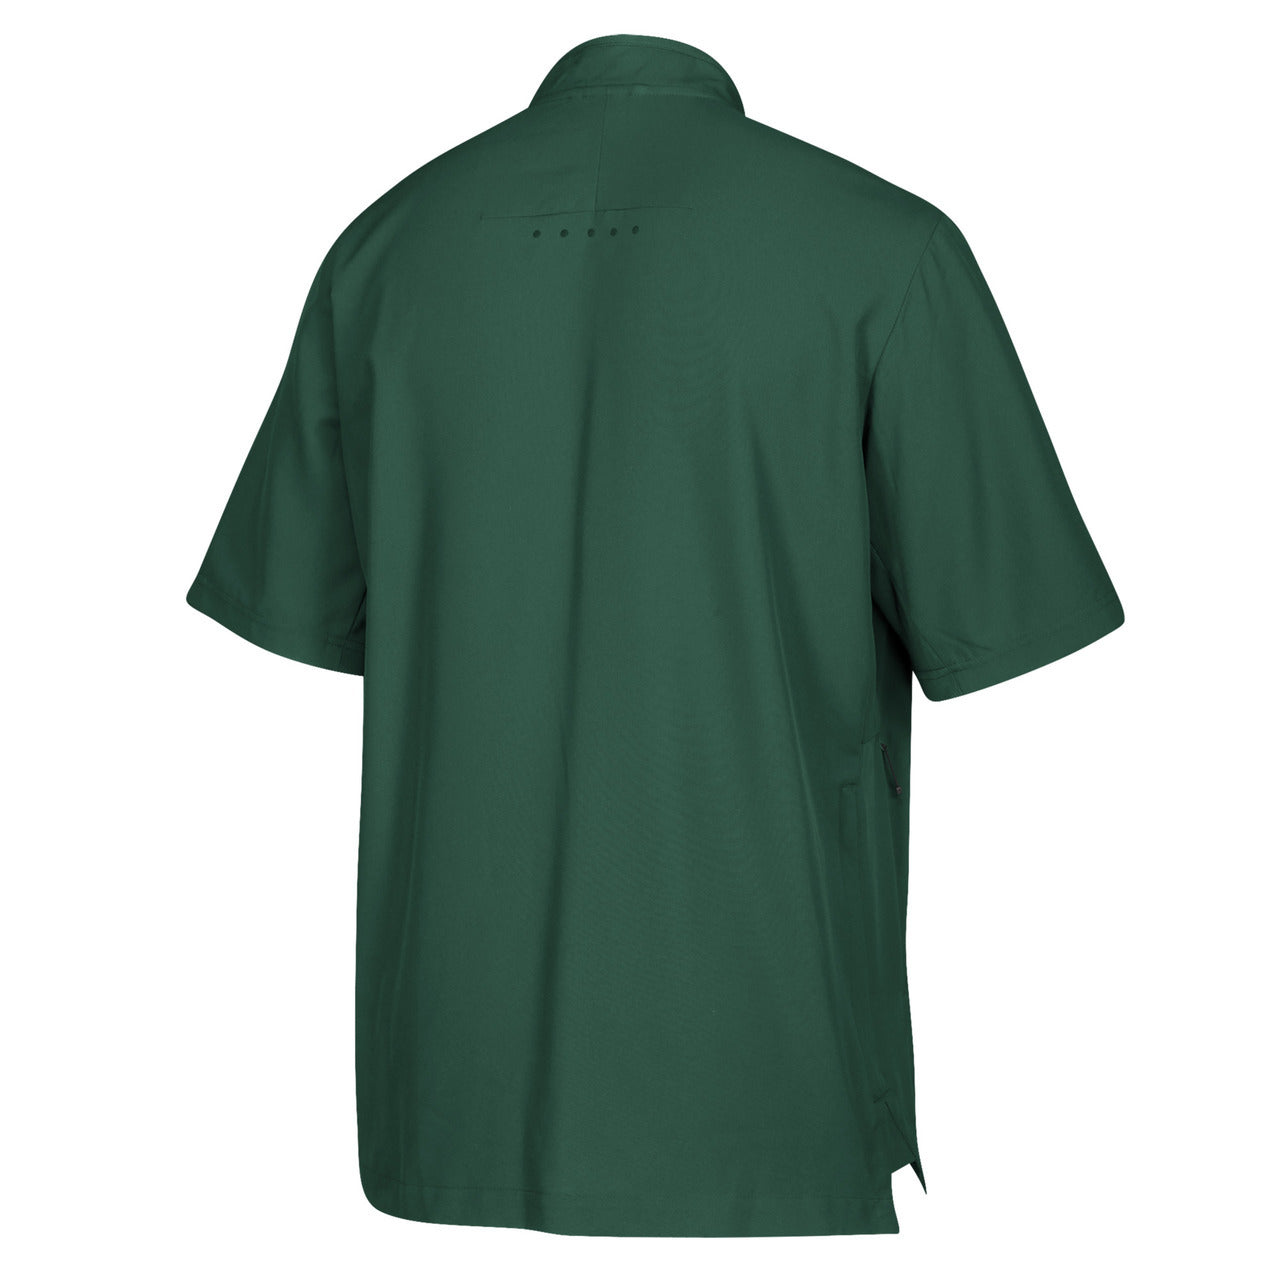 Men's USF Bulls Adidas Official Sideline Iconic 1/4 Zip